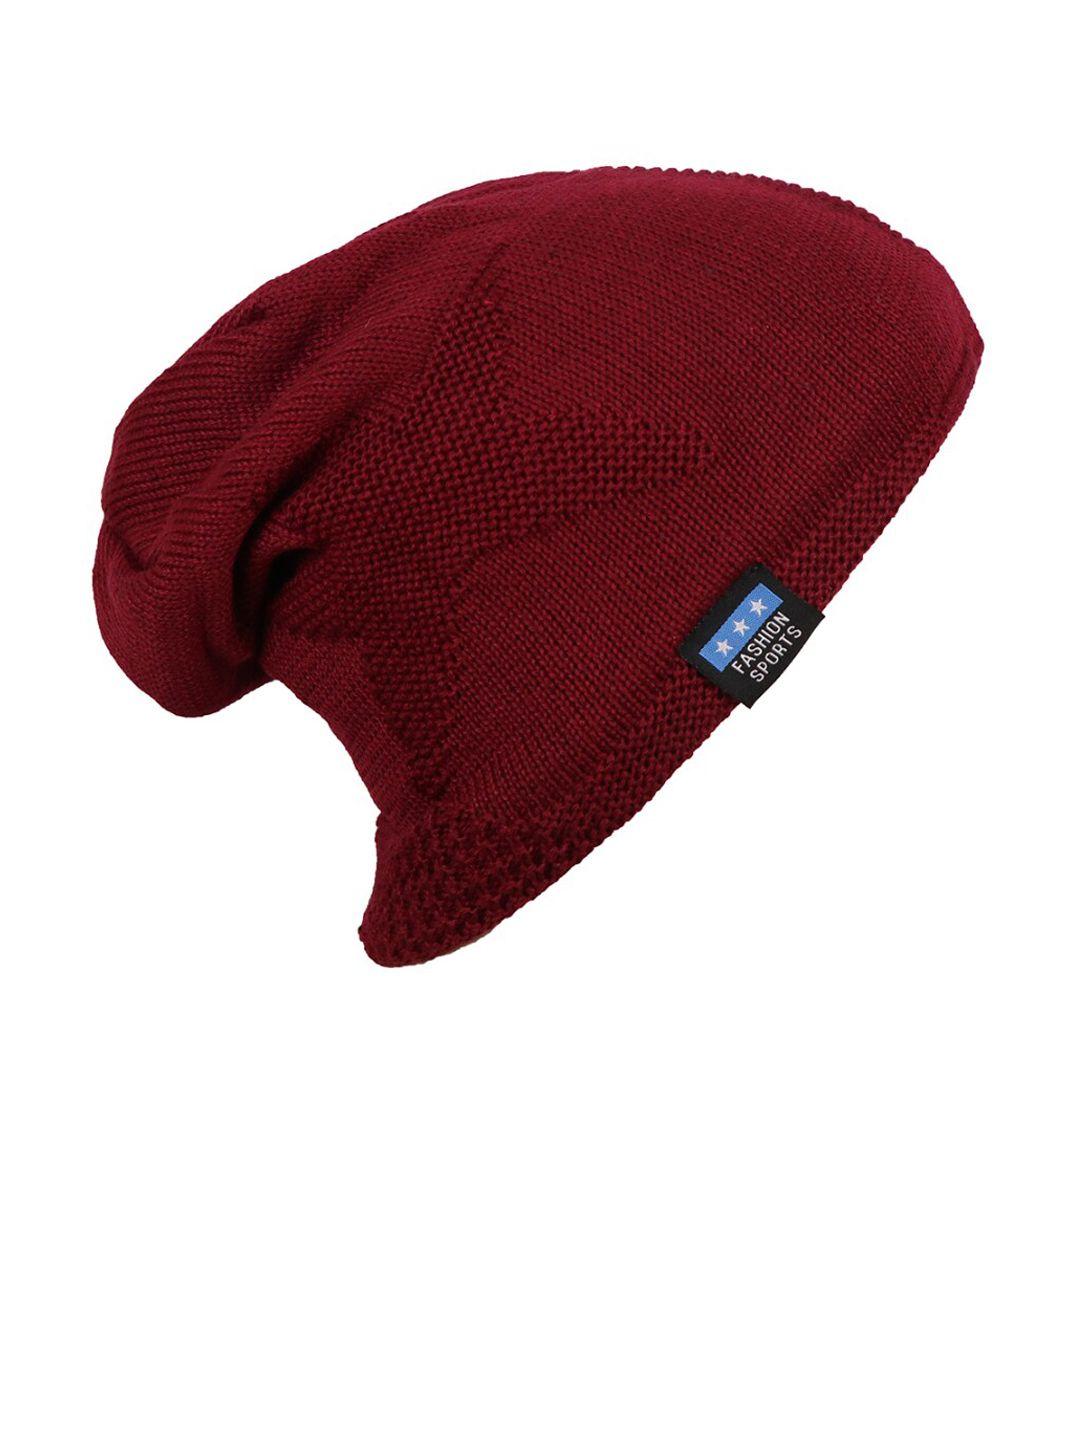 isweven unisex red self-design woven expandable beanie